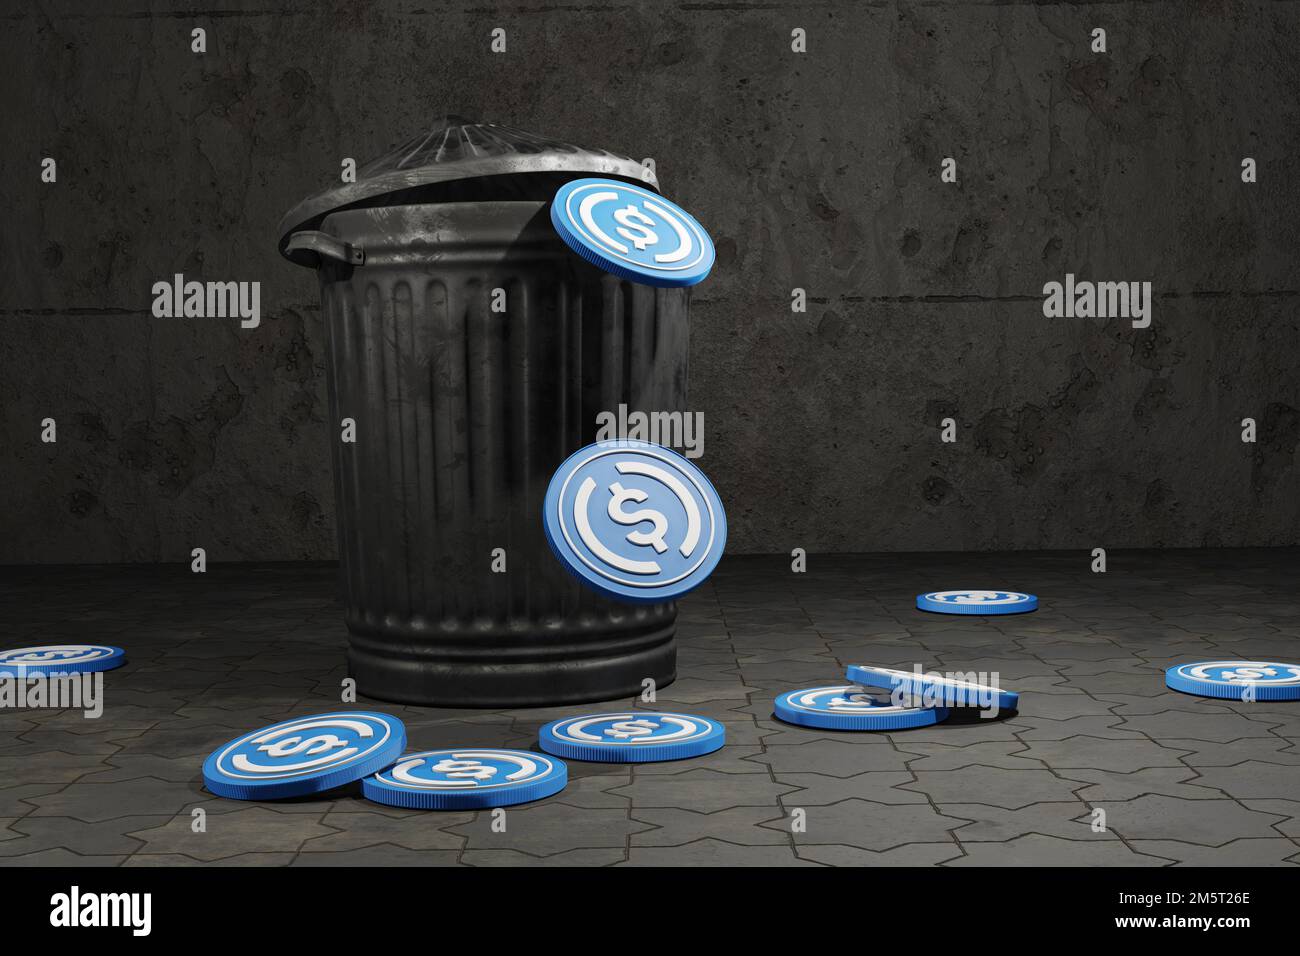 Many USD coins falling from a metallic rubbish bin in street. Illustration of the concept that USDC and stablecoin is on the brink of collapse Stock Photo